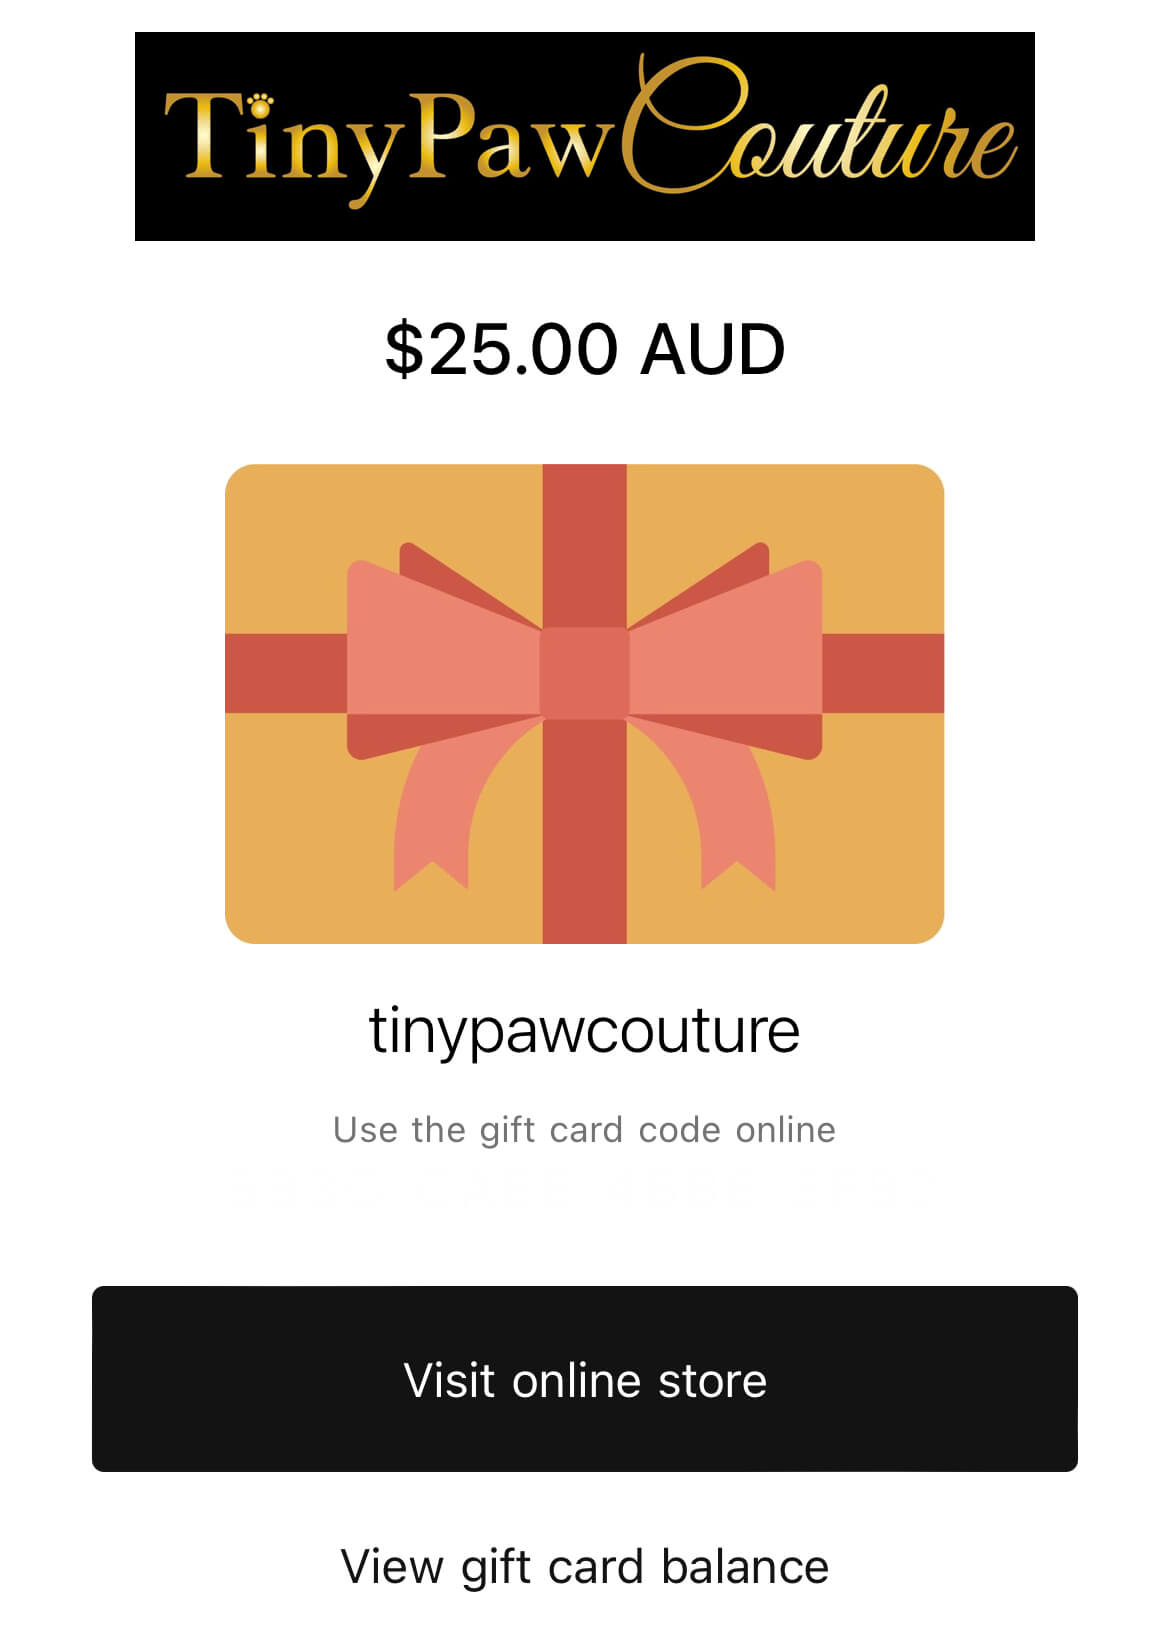 Tiny Paw Couture Gift Card